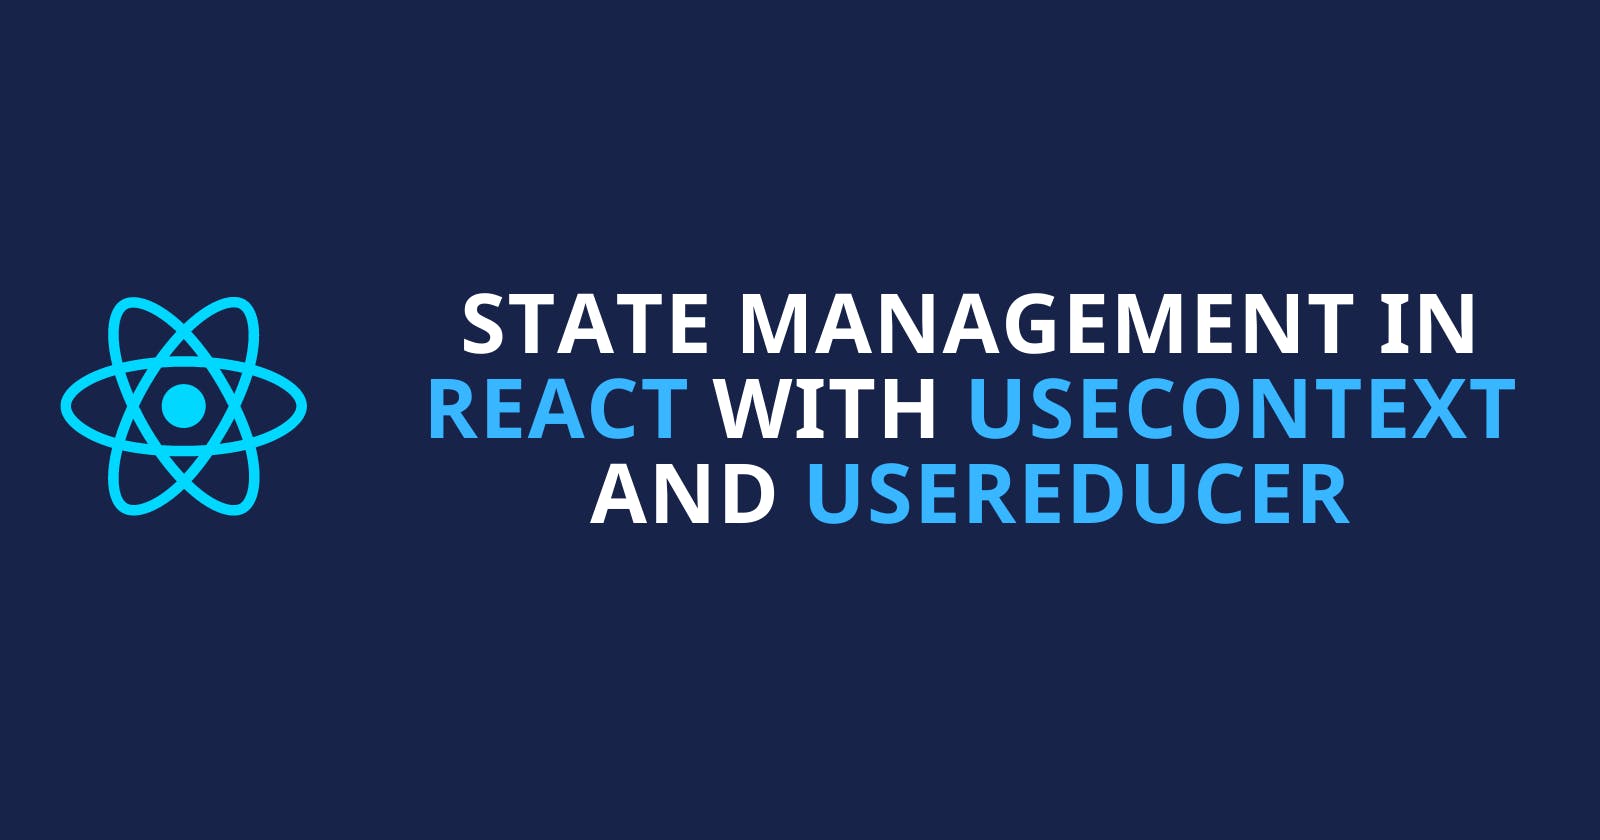 State management in React with useContext and useReducer